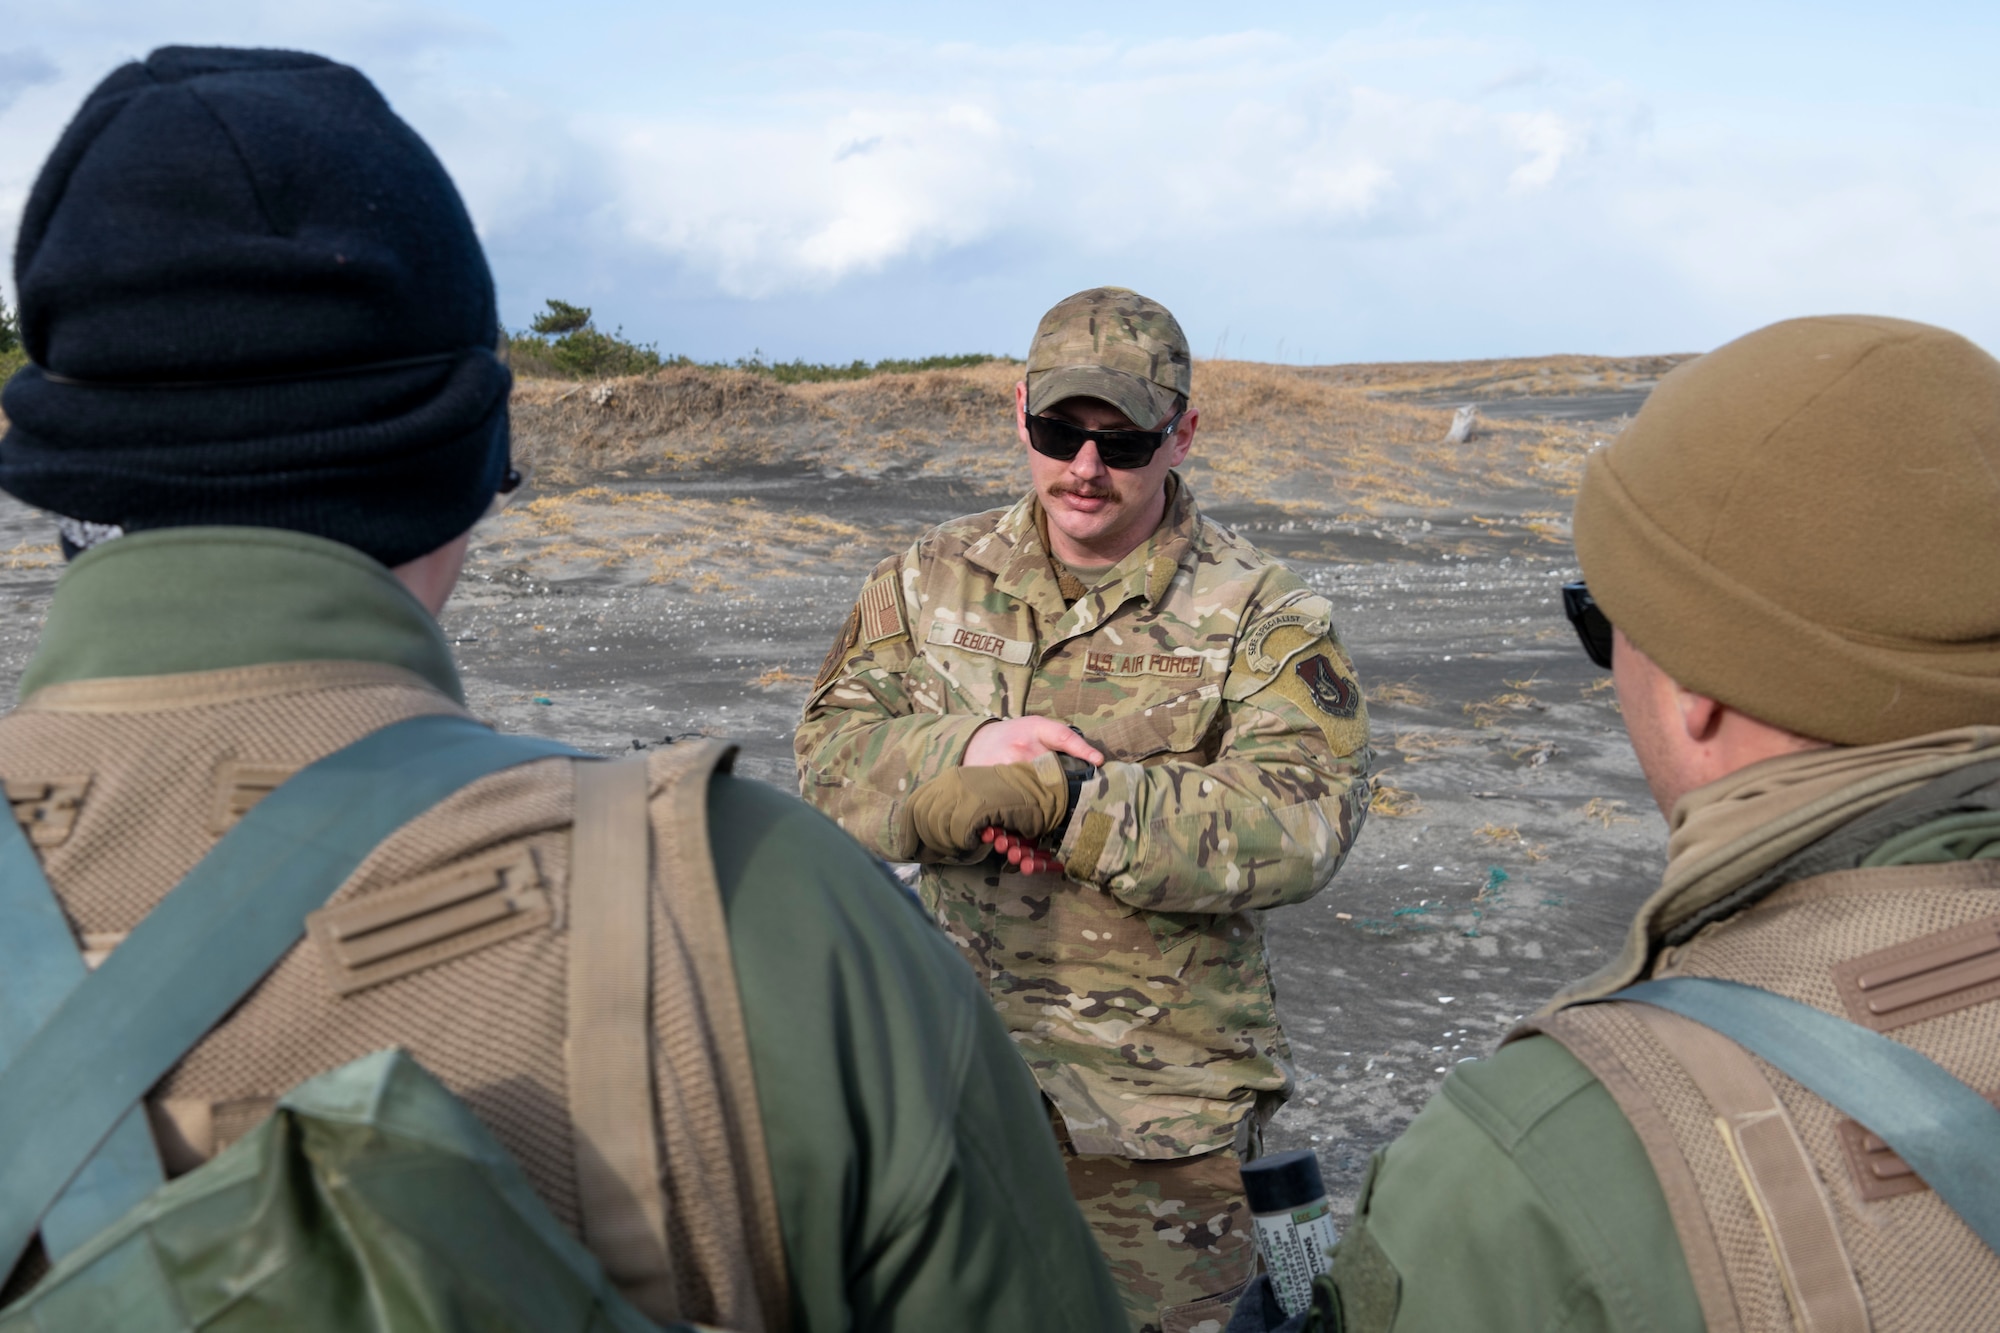 U.S. Air Force Staff Sgt. Dalton Deboer, 35th Operations Group Support Squadron survival, evasion, resistance and escape (SERE) specialist, briefs pilots before a combat survival skills training at Draughn Range near Misawa Air base, Japan